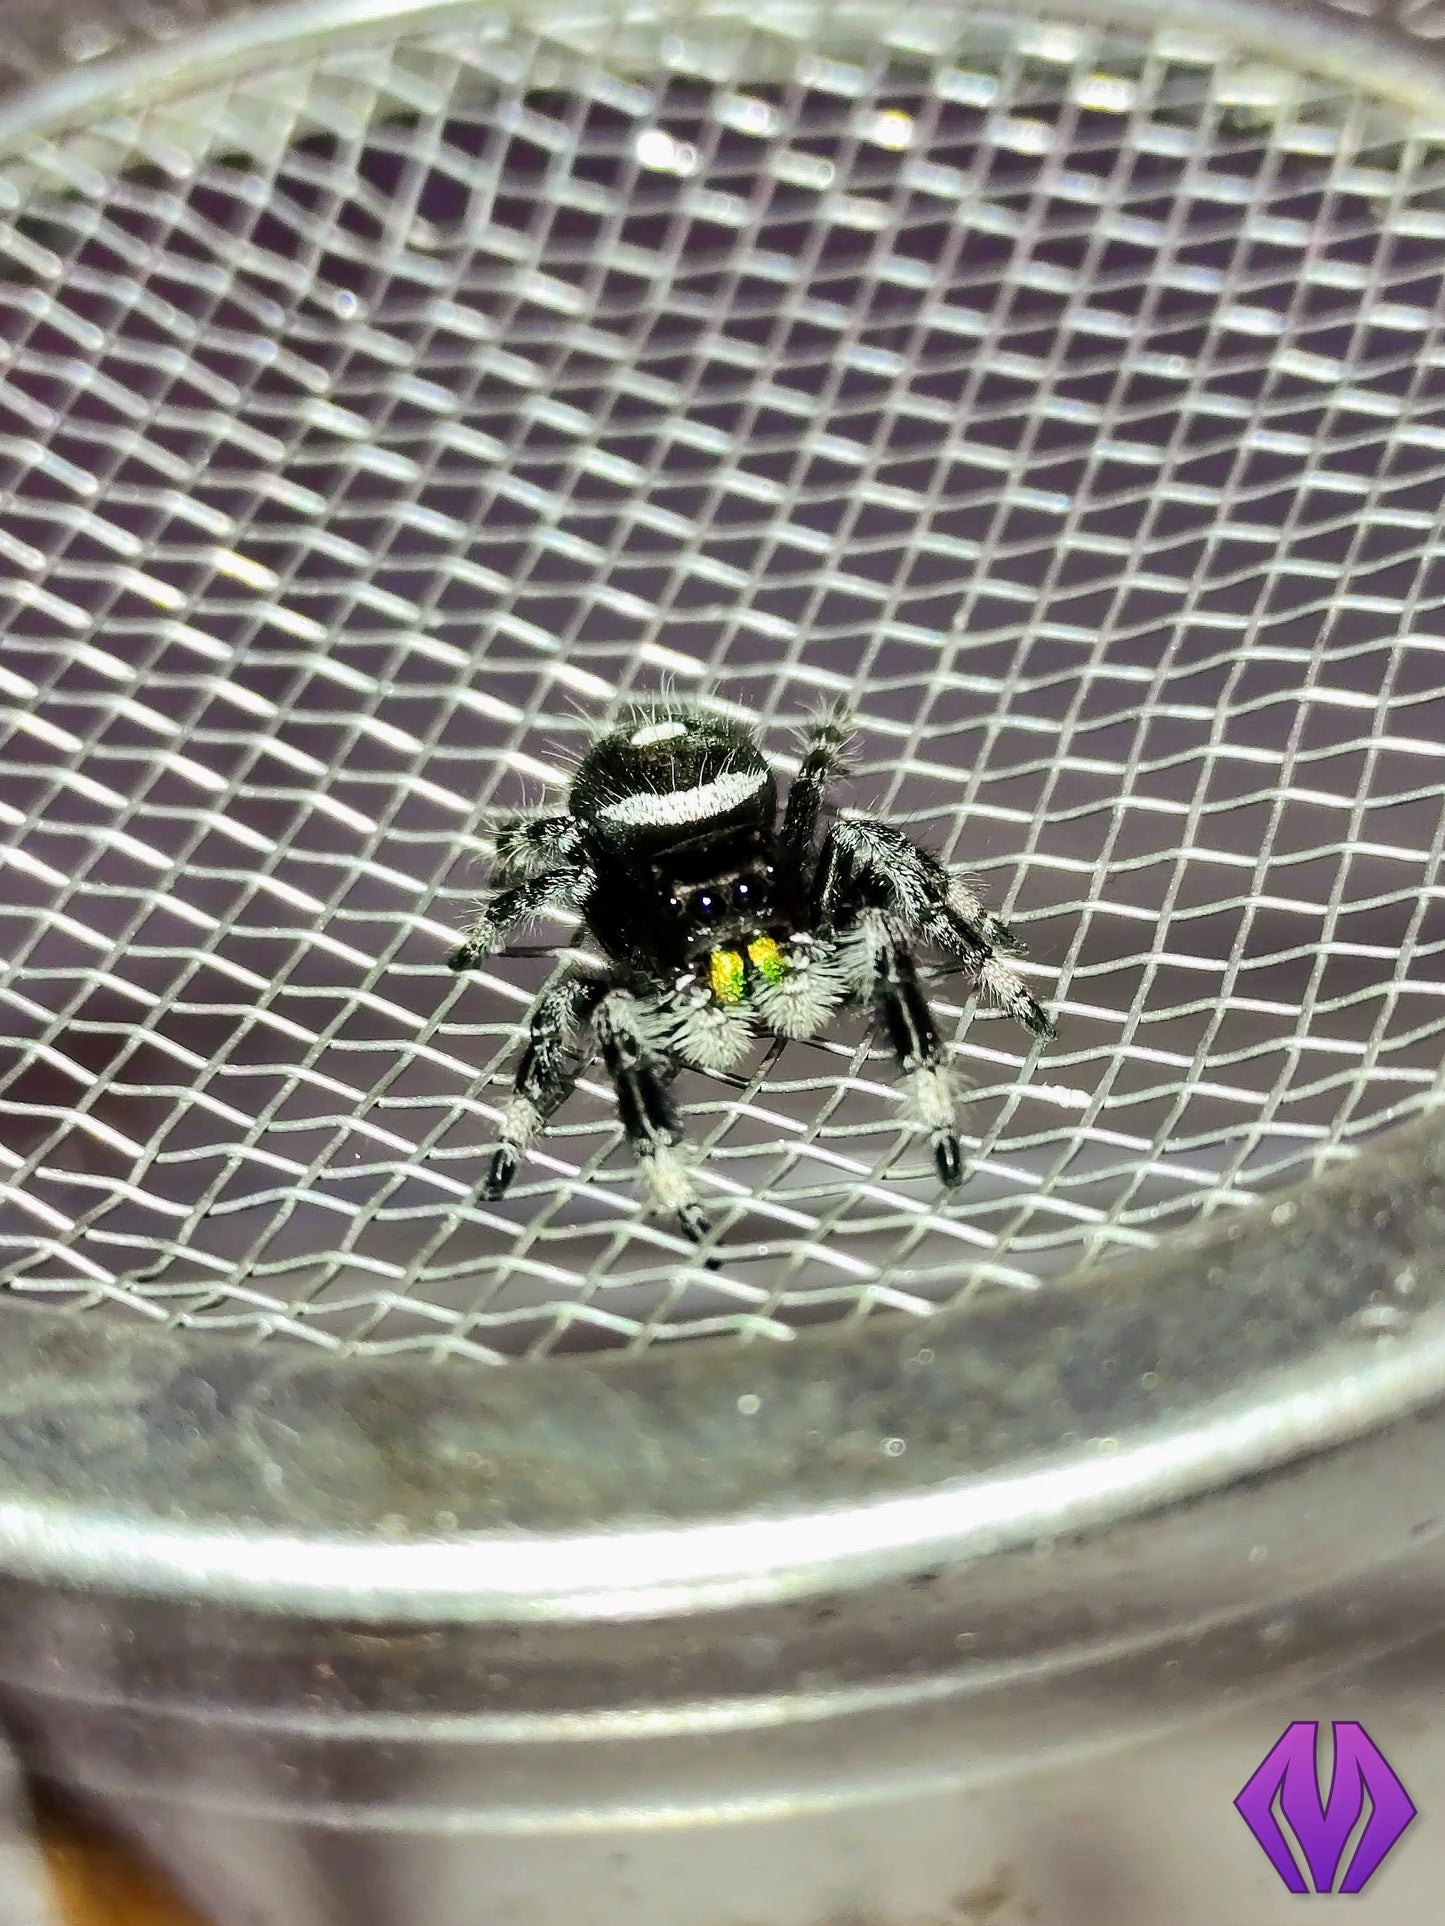 2-PACK regal jumping spider 5i+ GREEN chelicerae